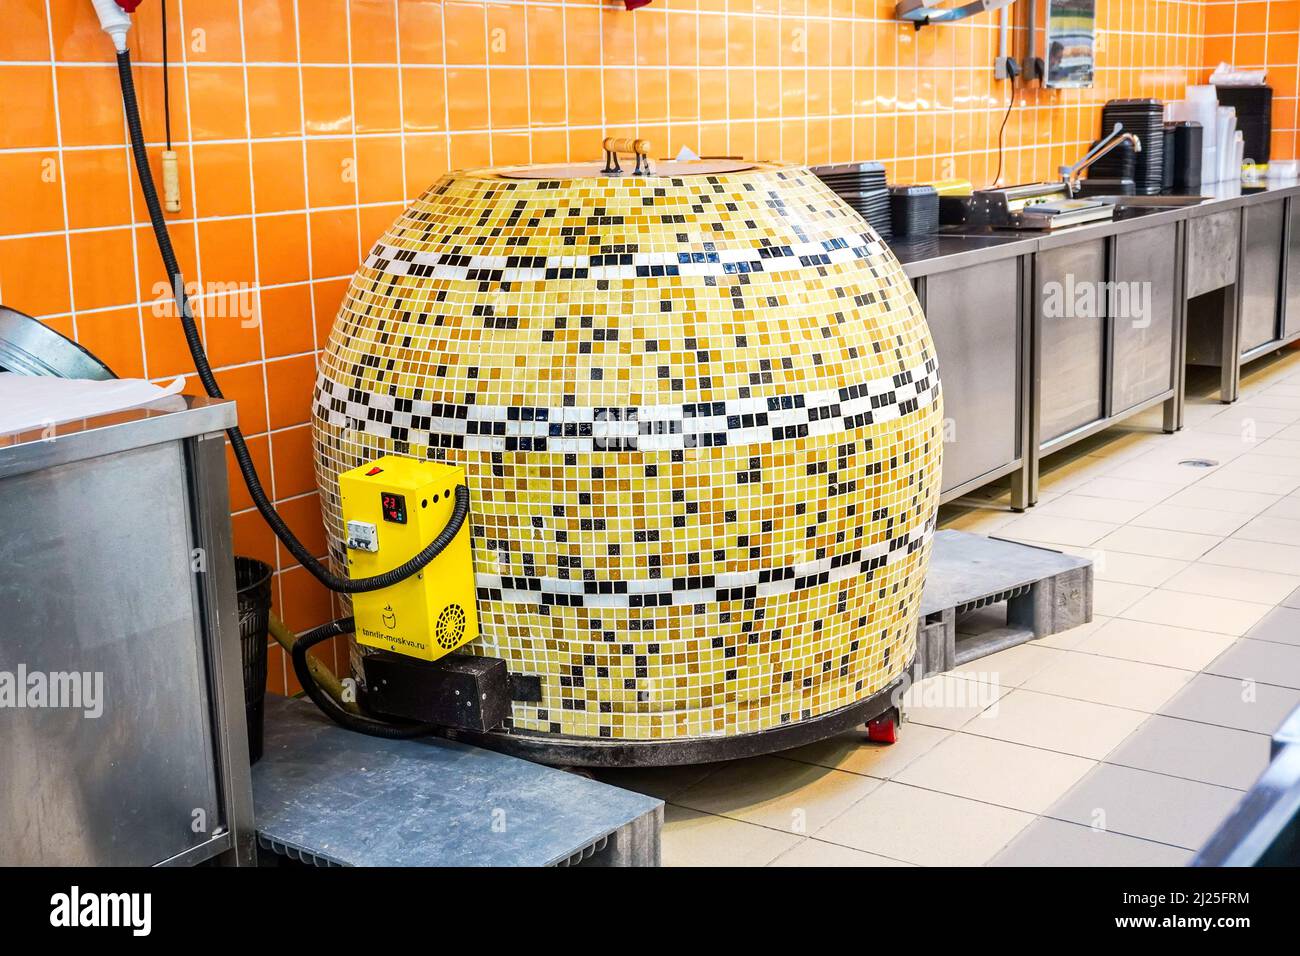 Samara, Russia - March 22, 2022: Large tandoor oven for making flat bread in a chain store Stock Photo